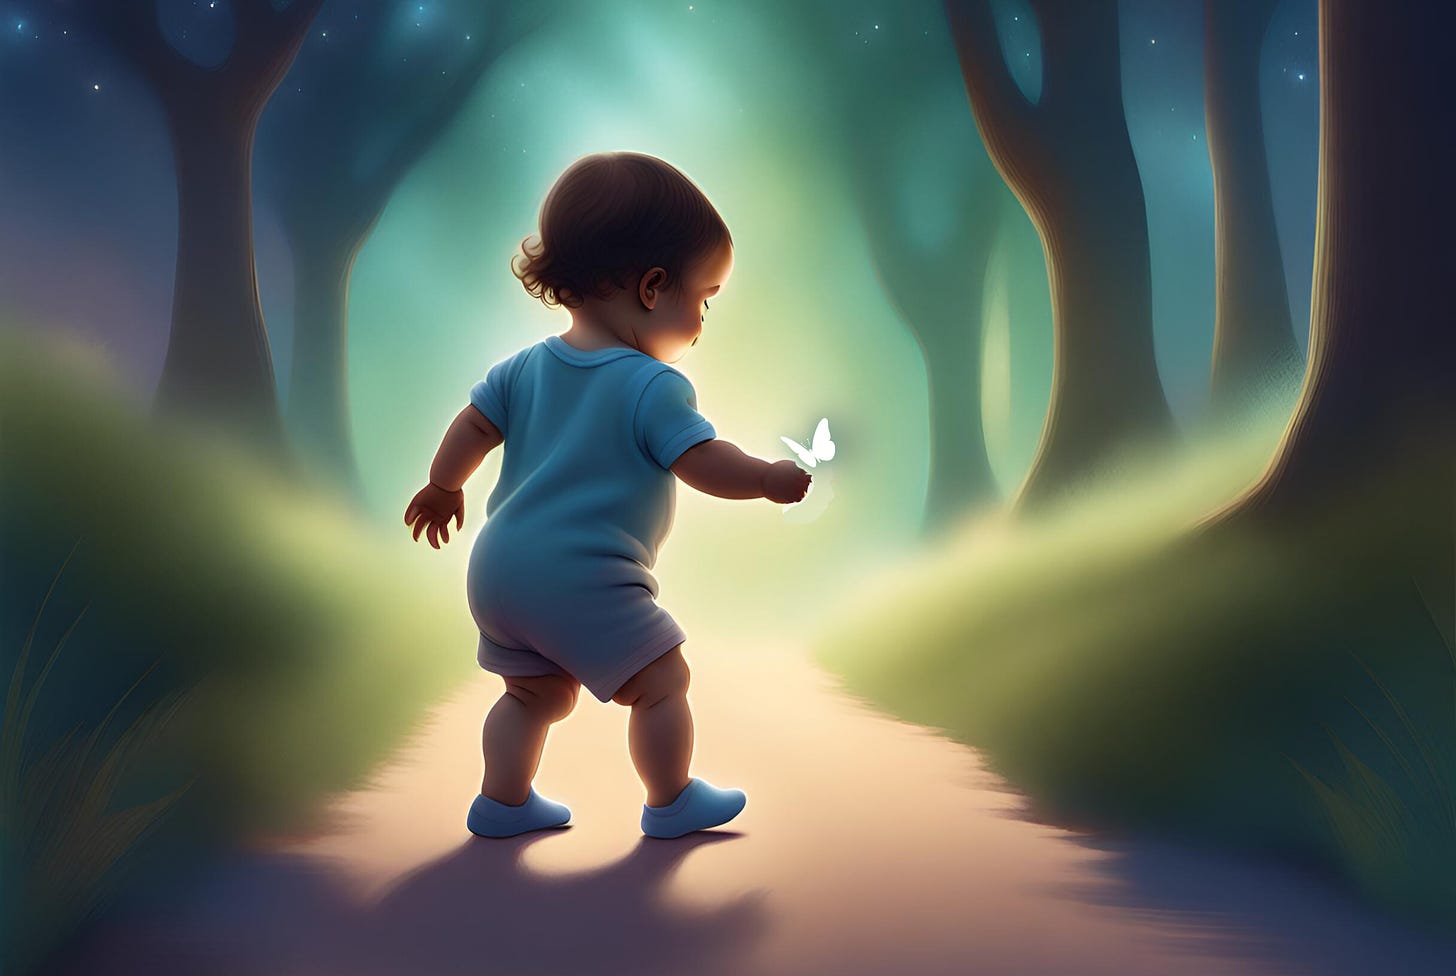 Illustration of a toddler learning to walk